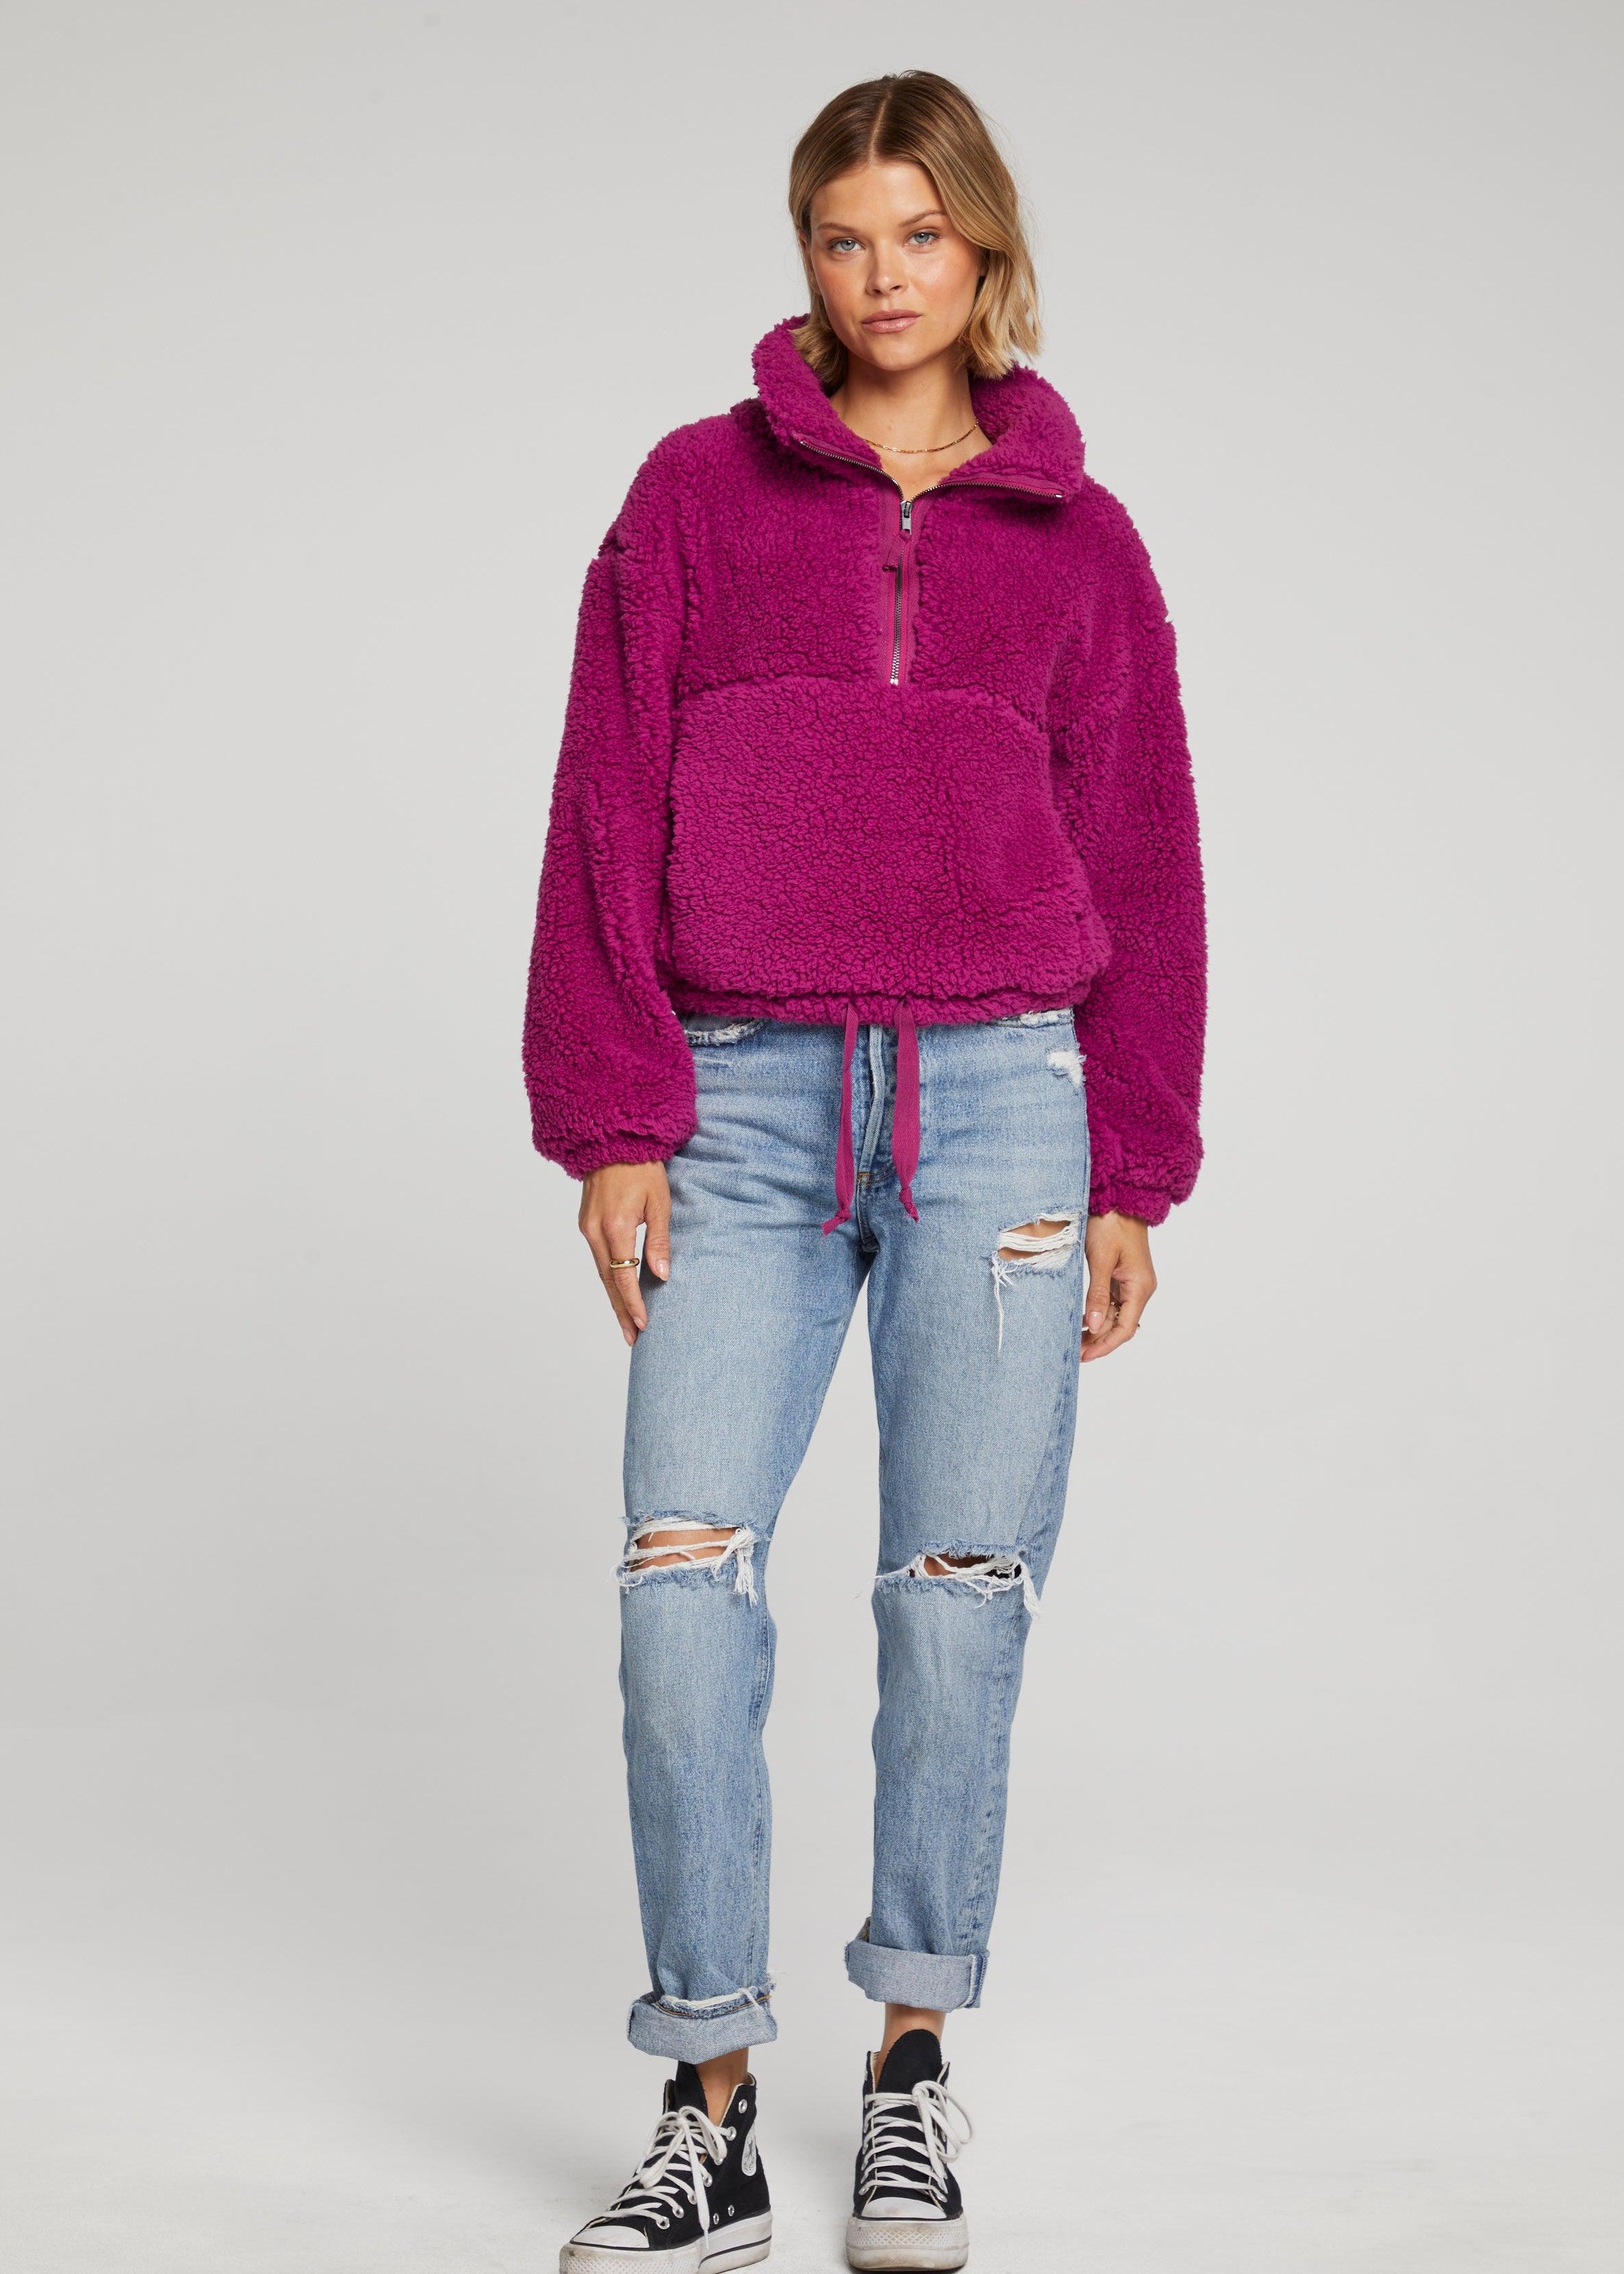 Everest Pullover - Fox Trot Boutique